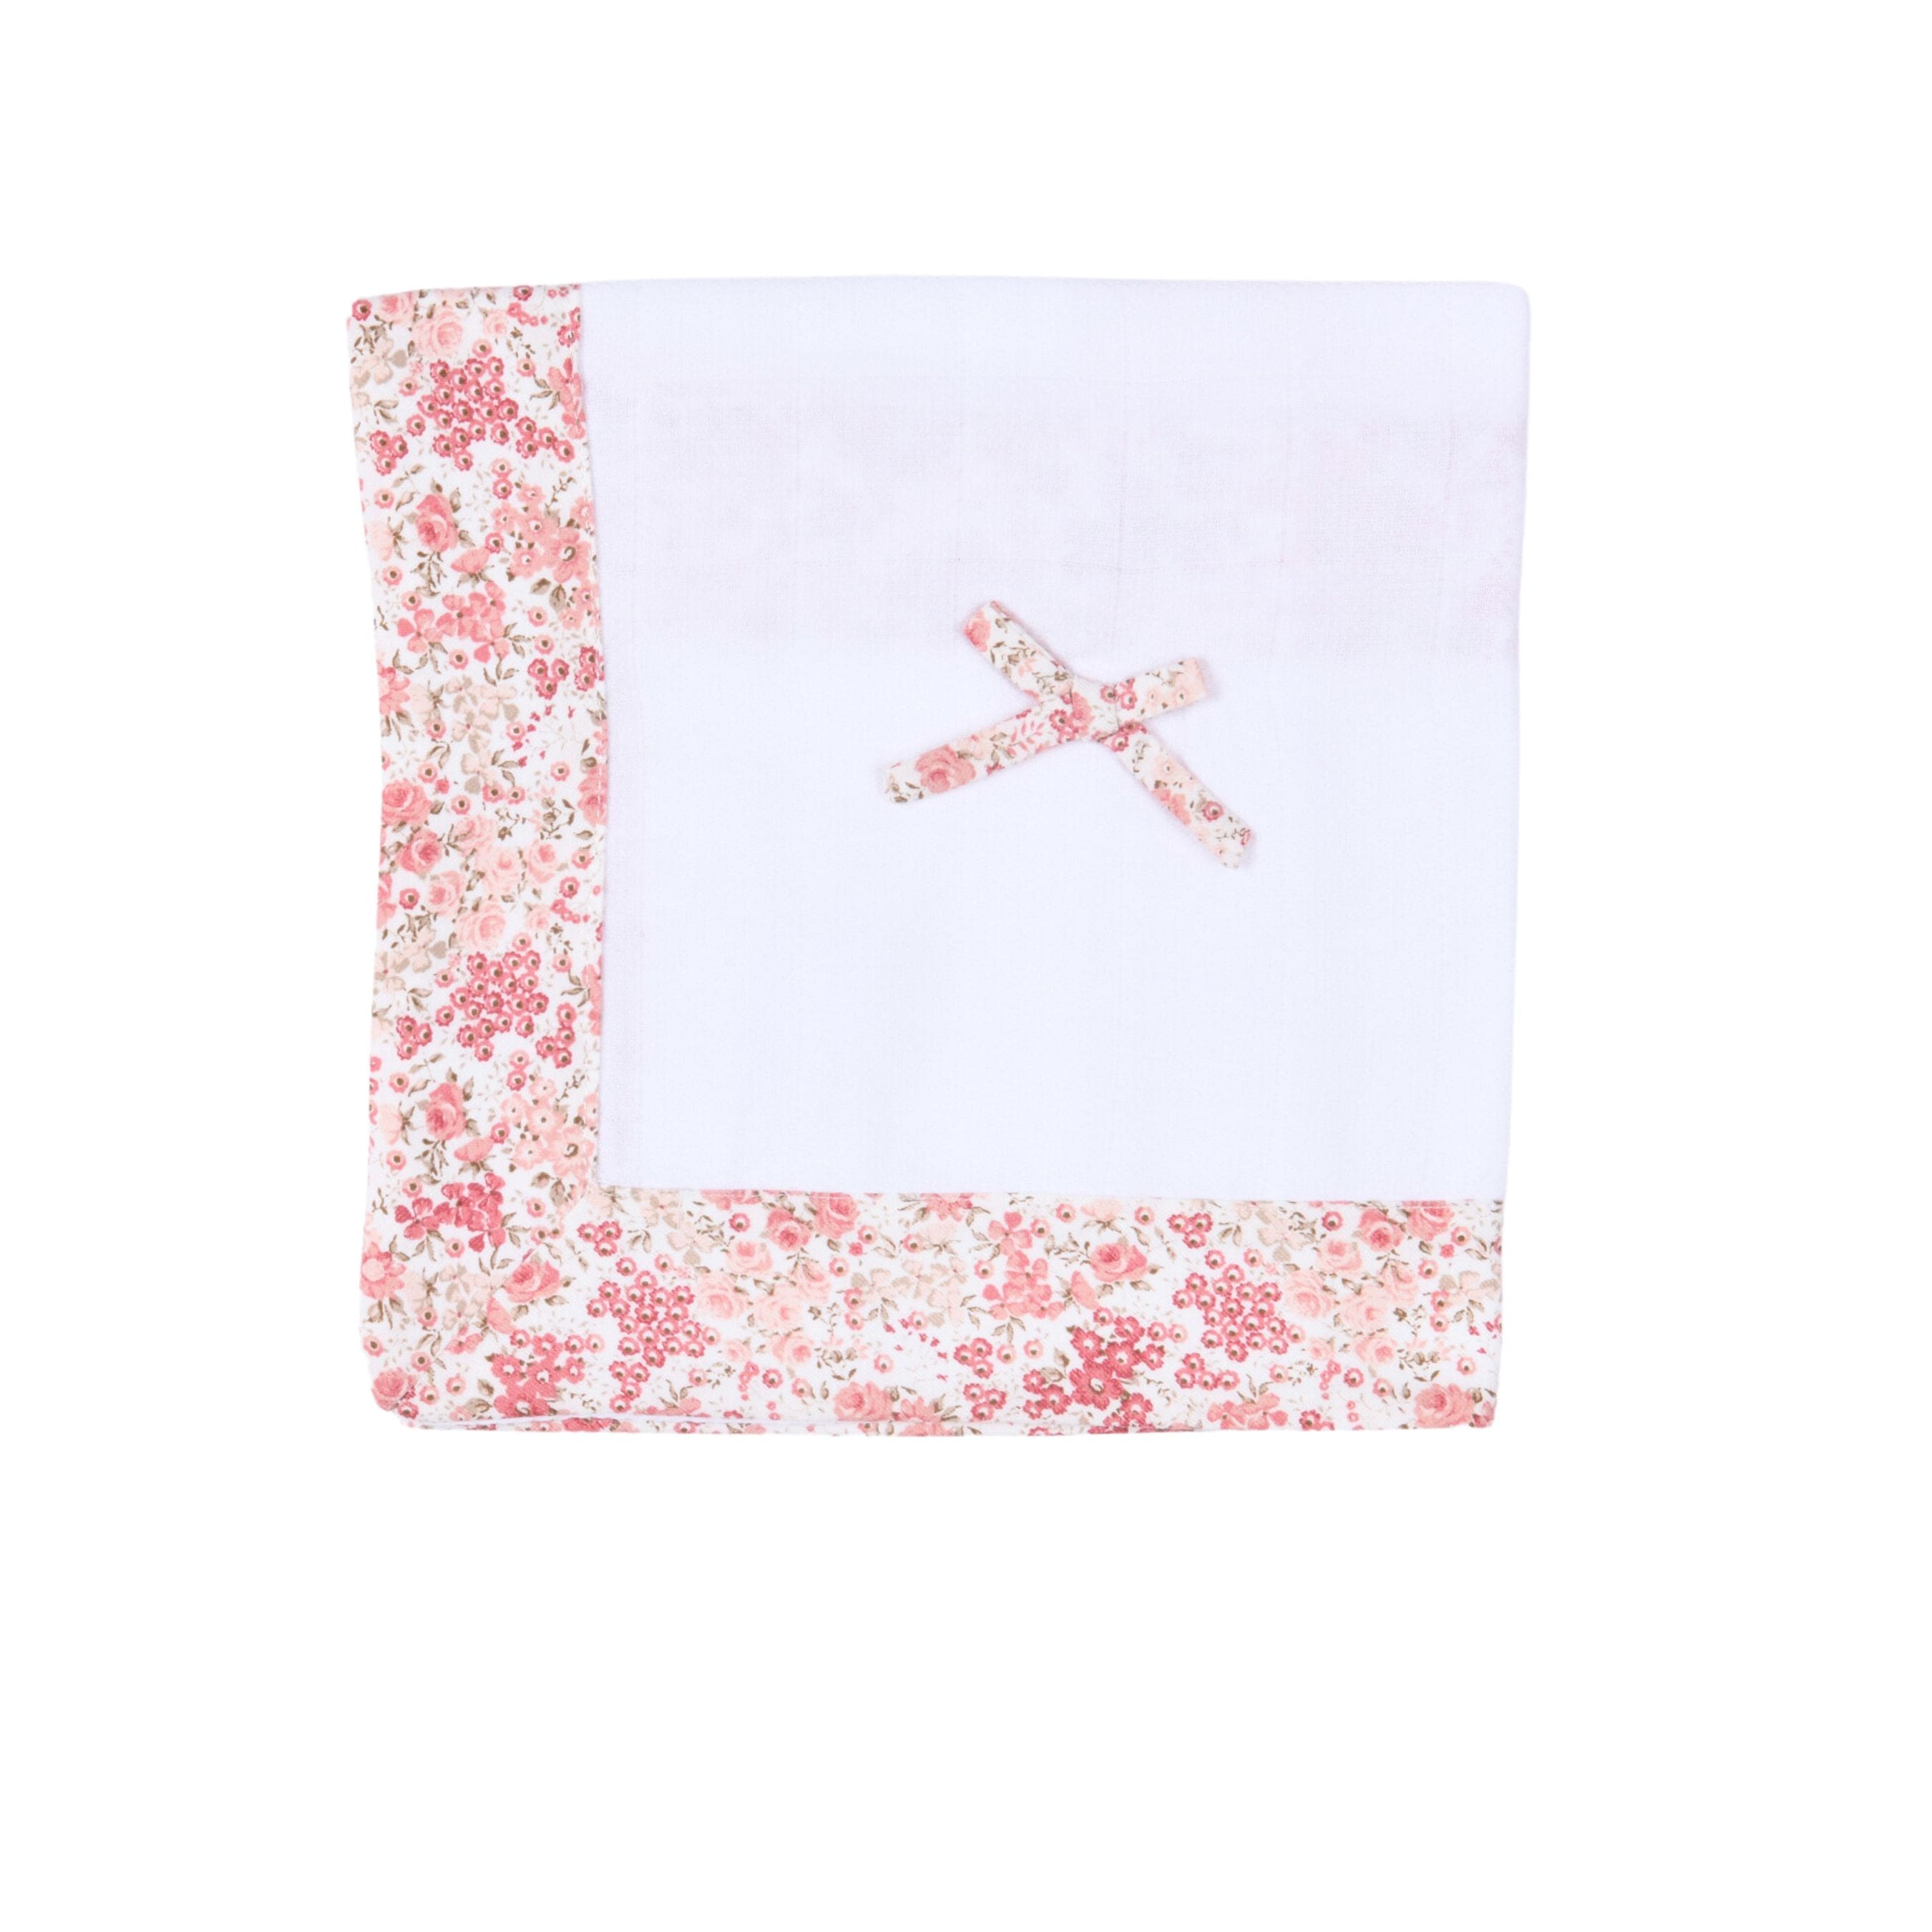 Flower | White Muslin Square With Flower Trim